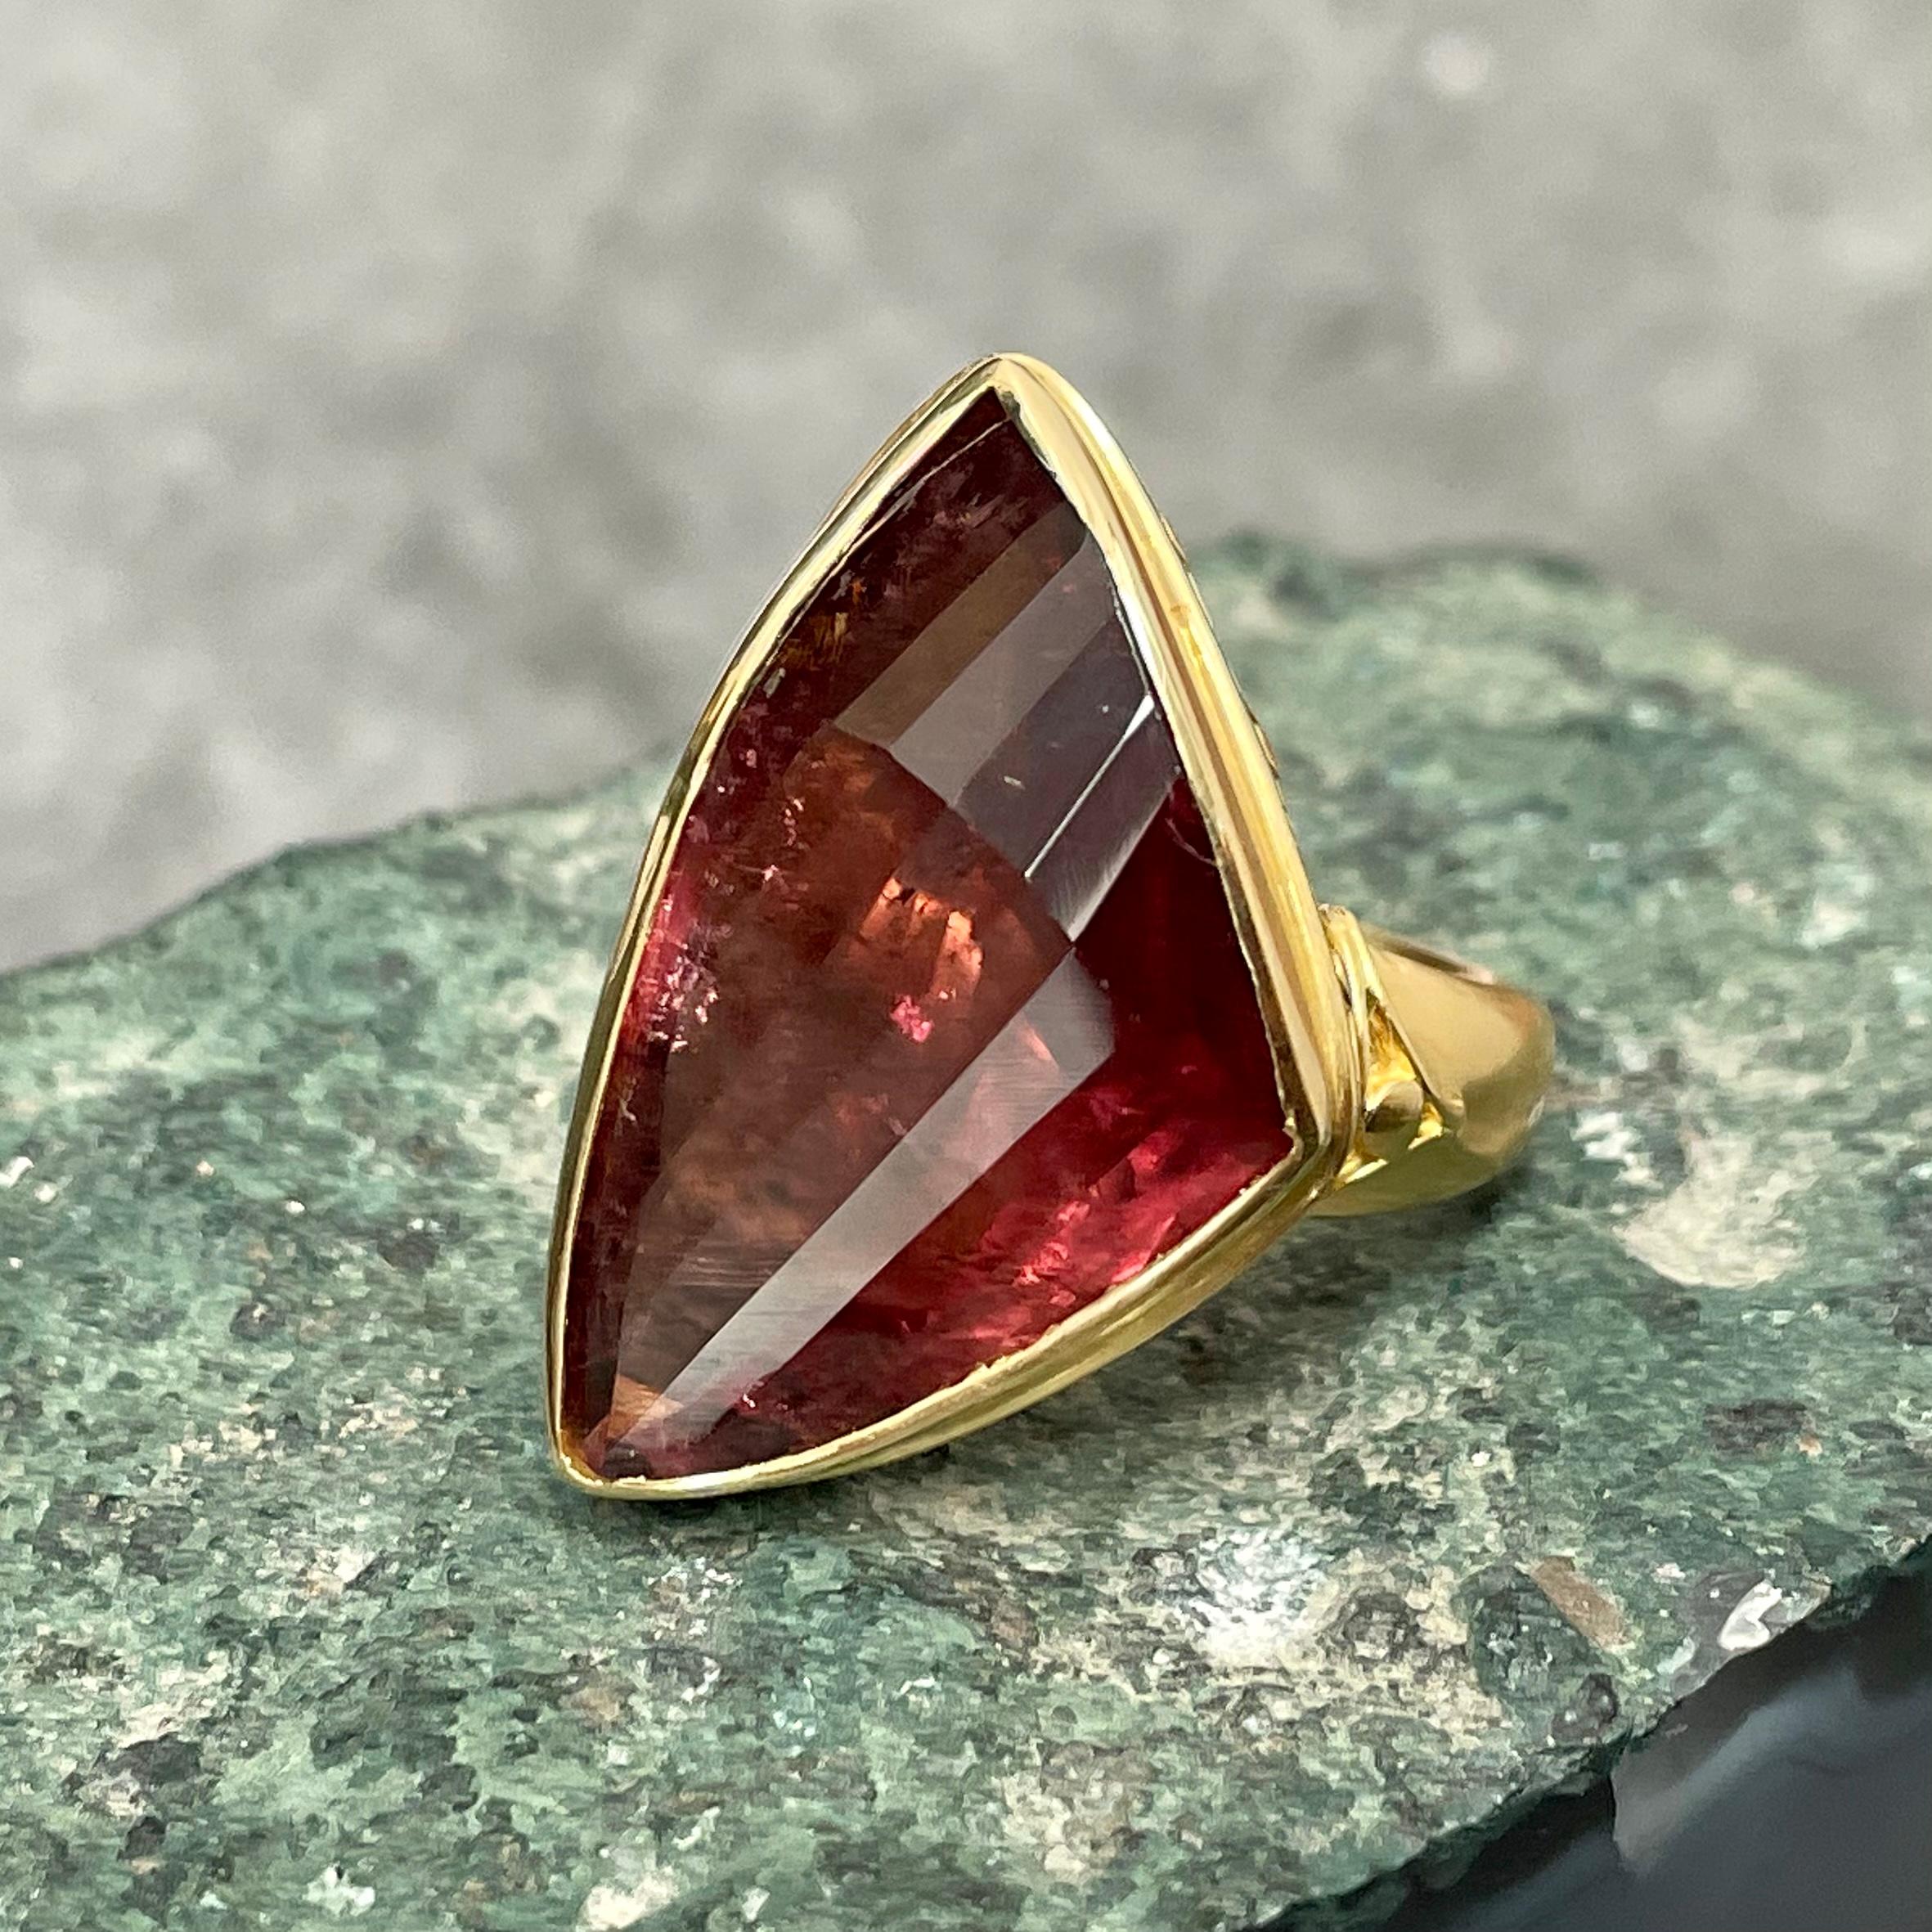 Steven Battelle 22.7 Carats Pink Tourmaline 18K Gold Ring In New Condition For Sale In Soquel, CA